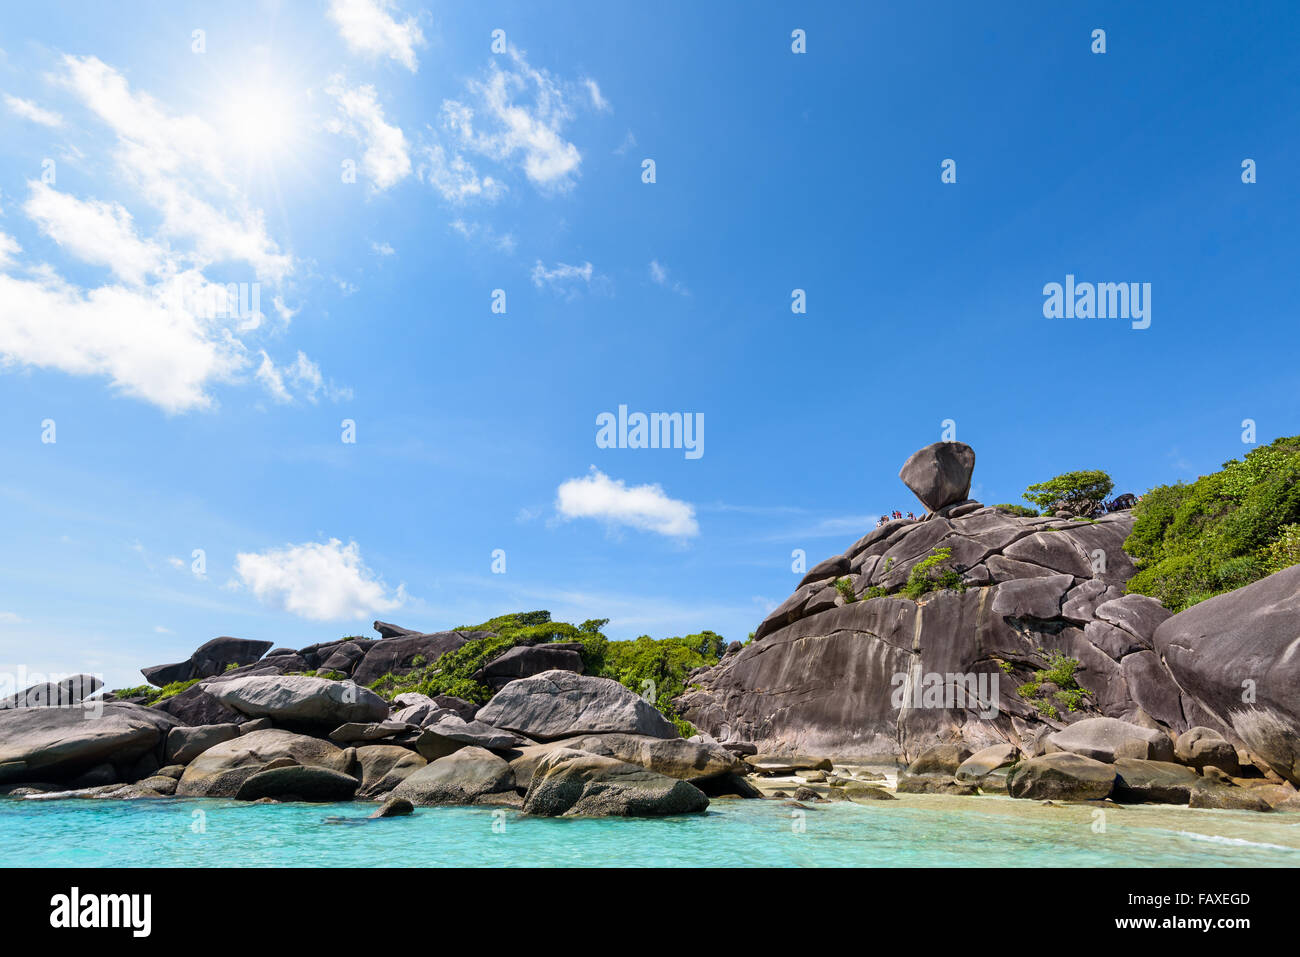 Beautiful landscape people on rock is a symbol of Similan Islands, sun on blue sky over the sea during summer at Mu Ko Similan Stock Photo